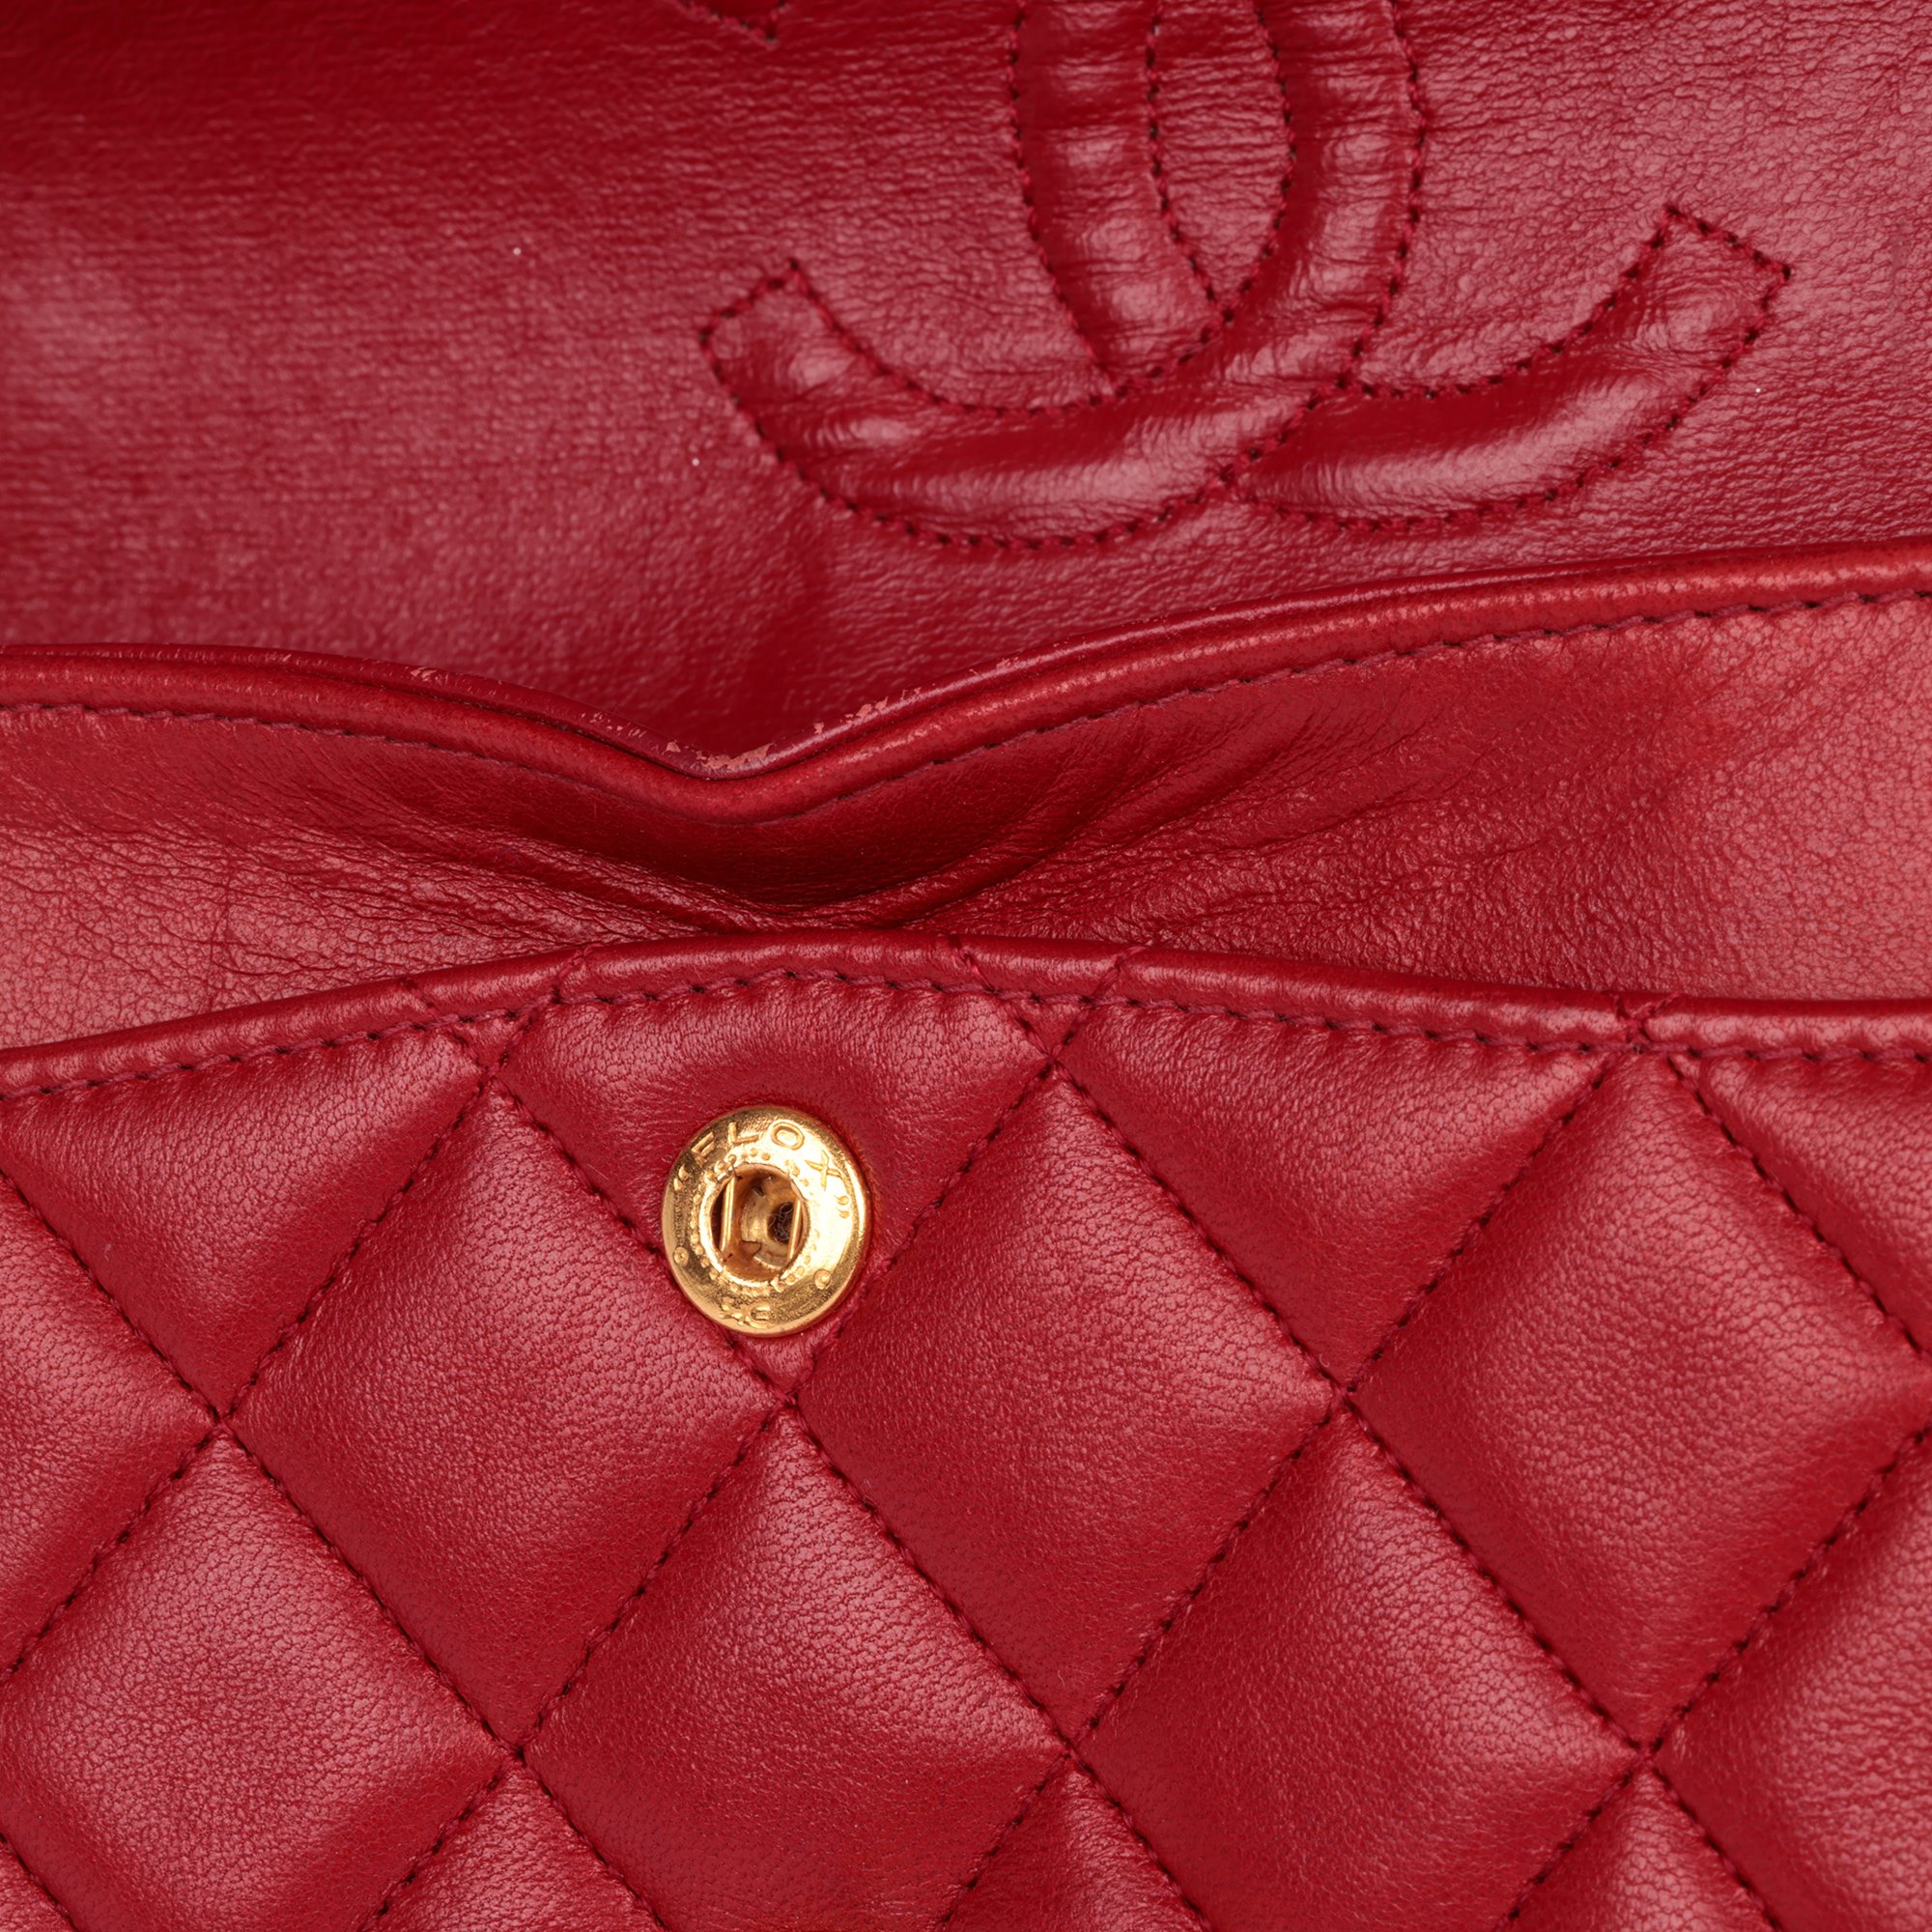 Chanel Red Quilted Lambskin Vintage Small Classic Double Flap Bag